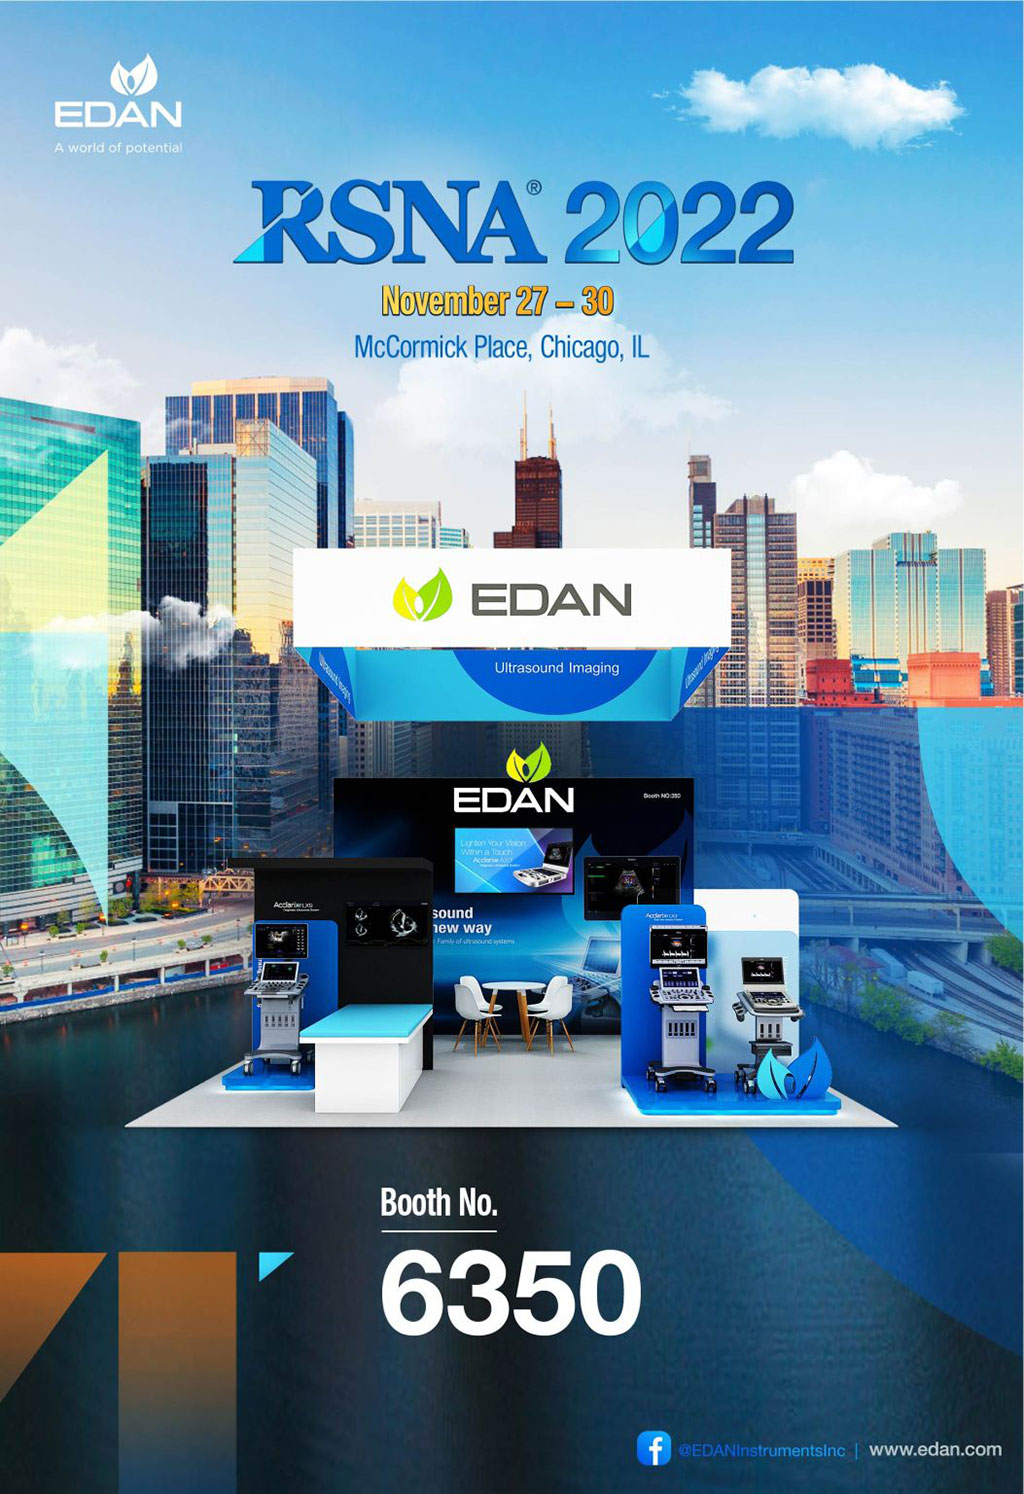 Image: EDAN is presenting its newly upgraded, flagship ultrasound solutions at RSNA 2022 (Photo courtesy of EDAN)